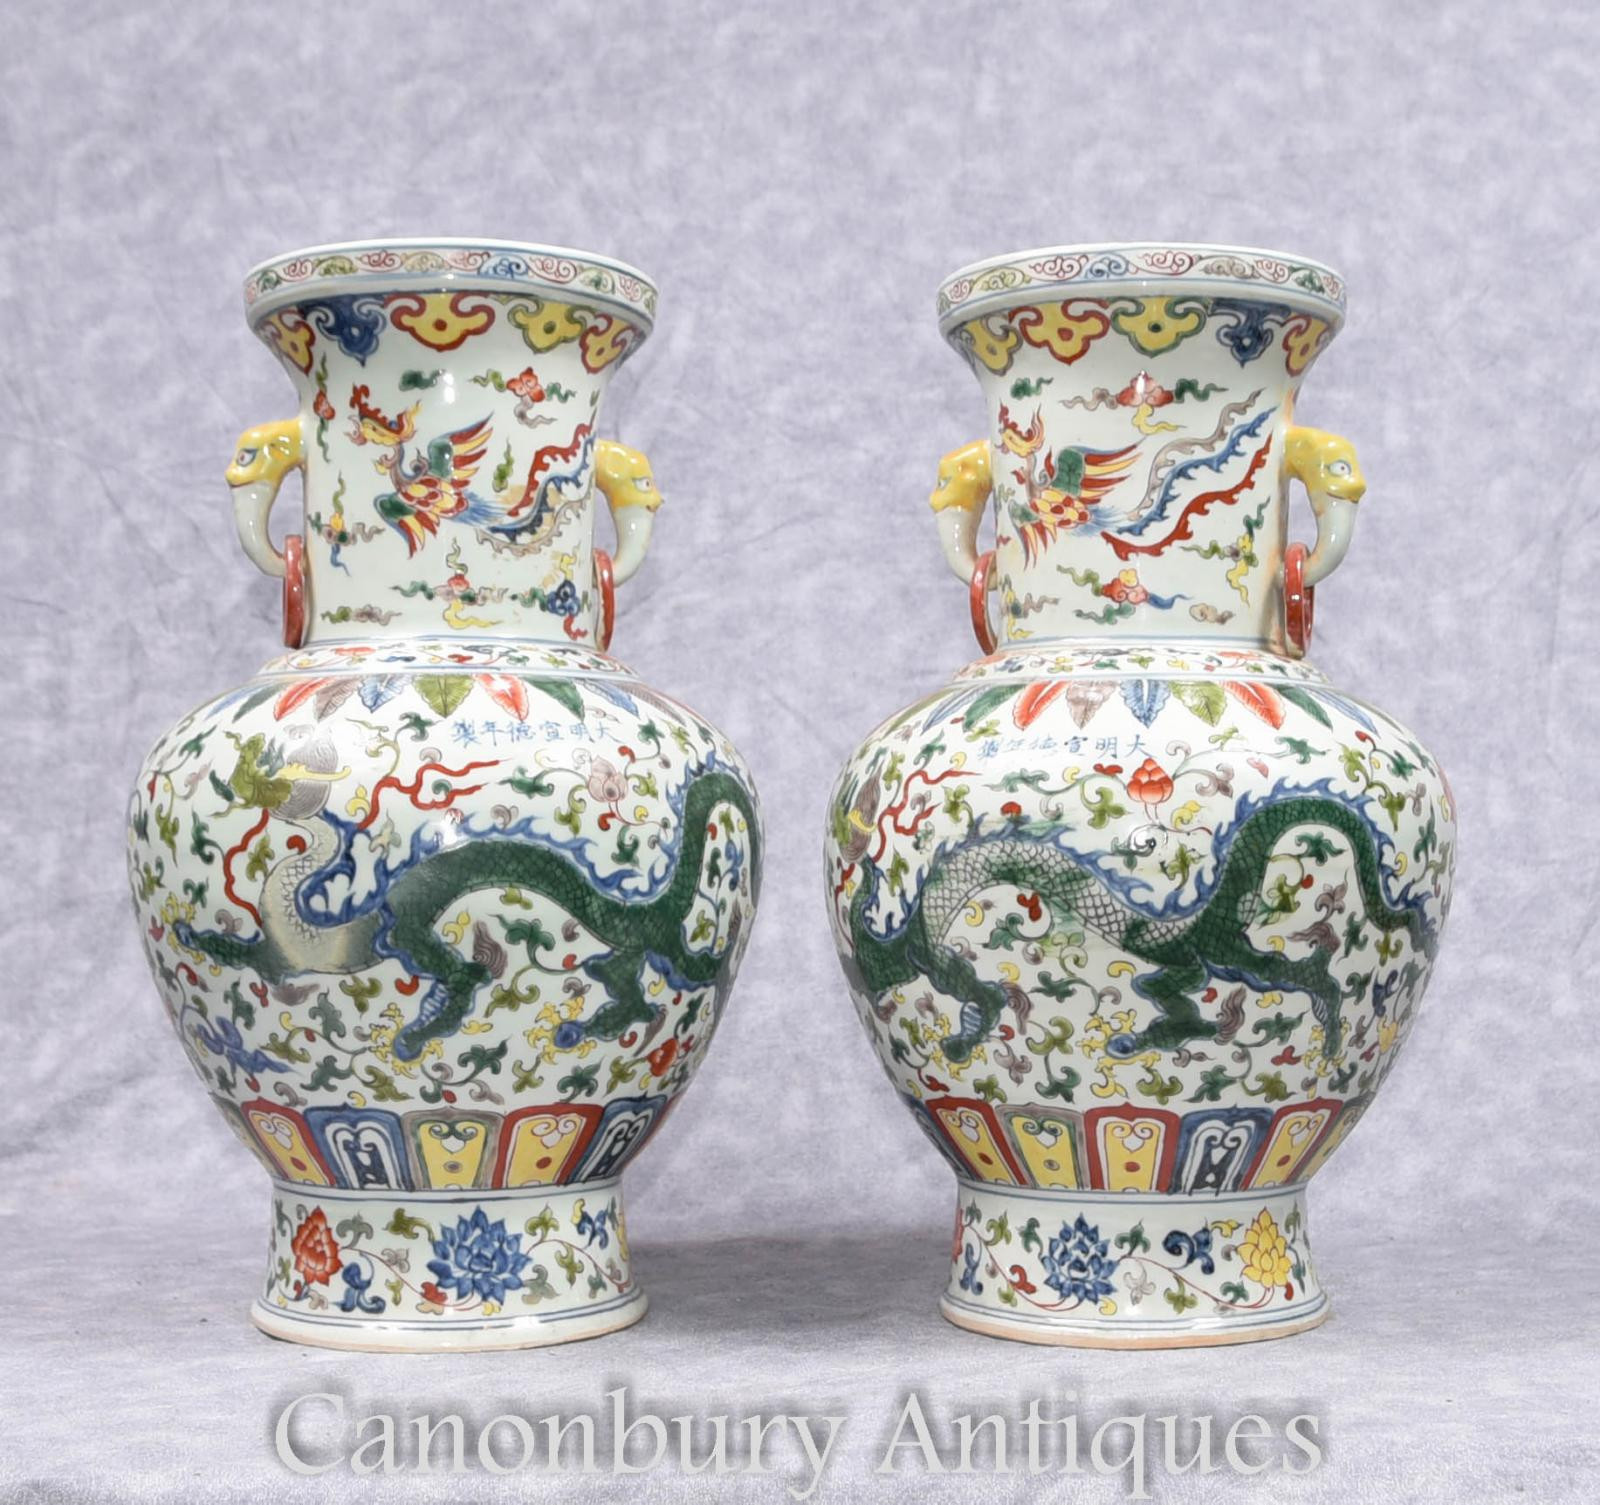 16 Famous Blue and White Porcelain Vases for Sale 2024 free download blue and white porcelain vases for sale of pair chinese qianlong porcelain vases dragon urns ceramic china ebay within please contact us if you would like to view any of these items at our s